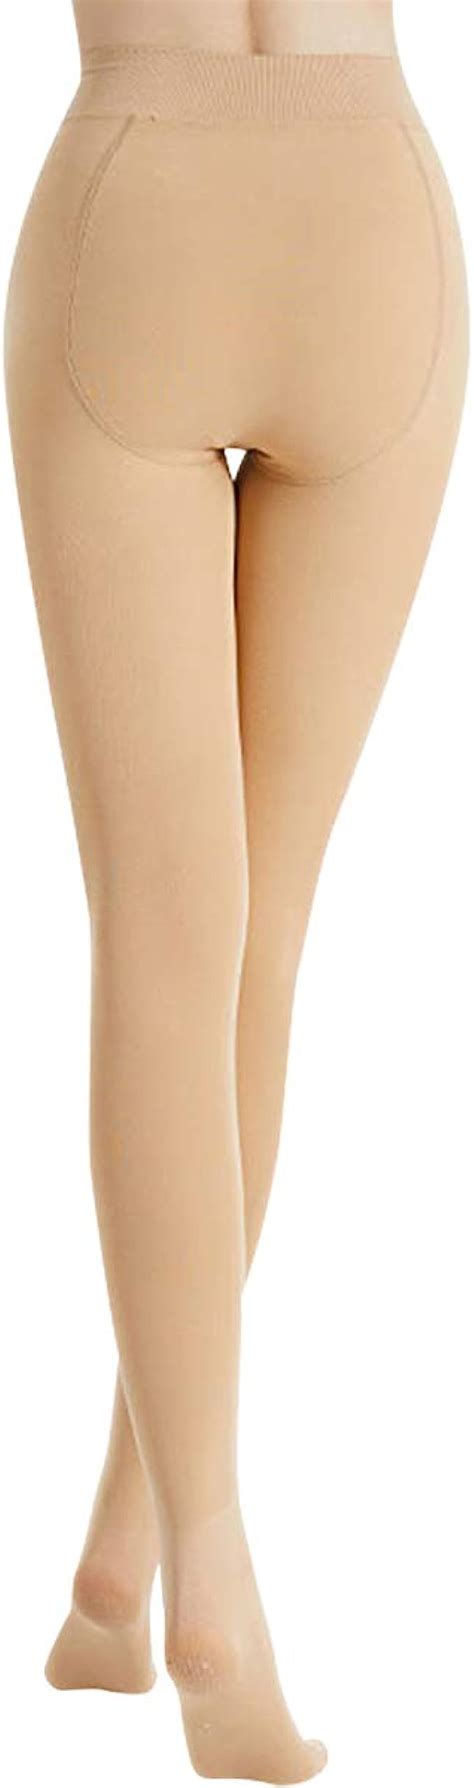 la dearchuu fleece lined tights women opaque thermal tights oversize